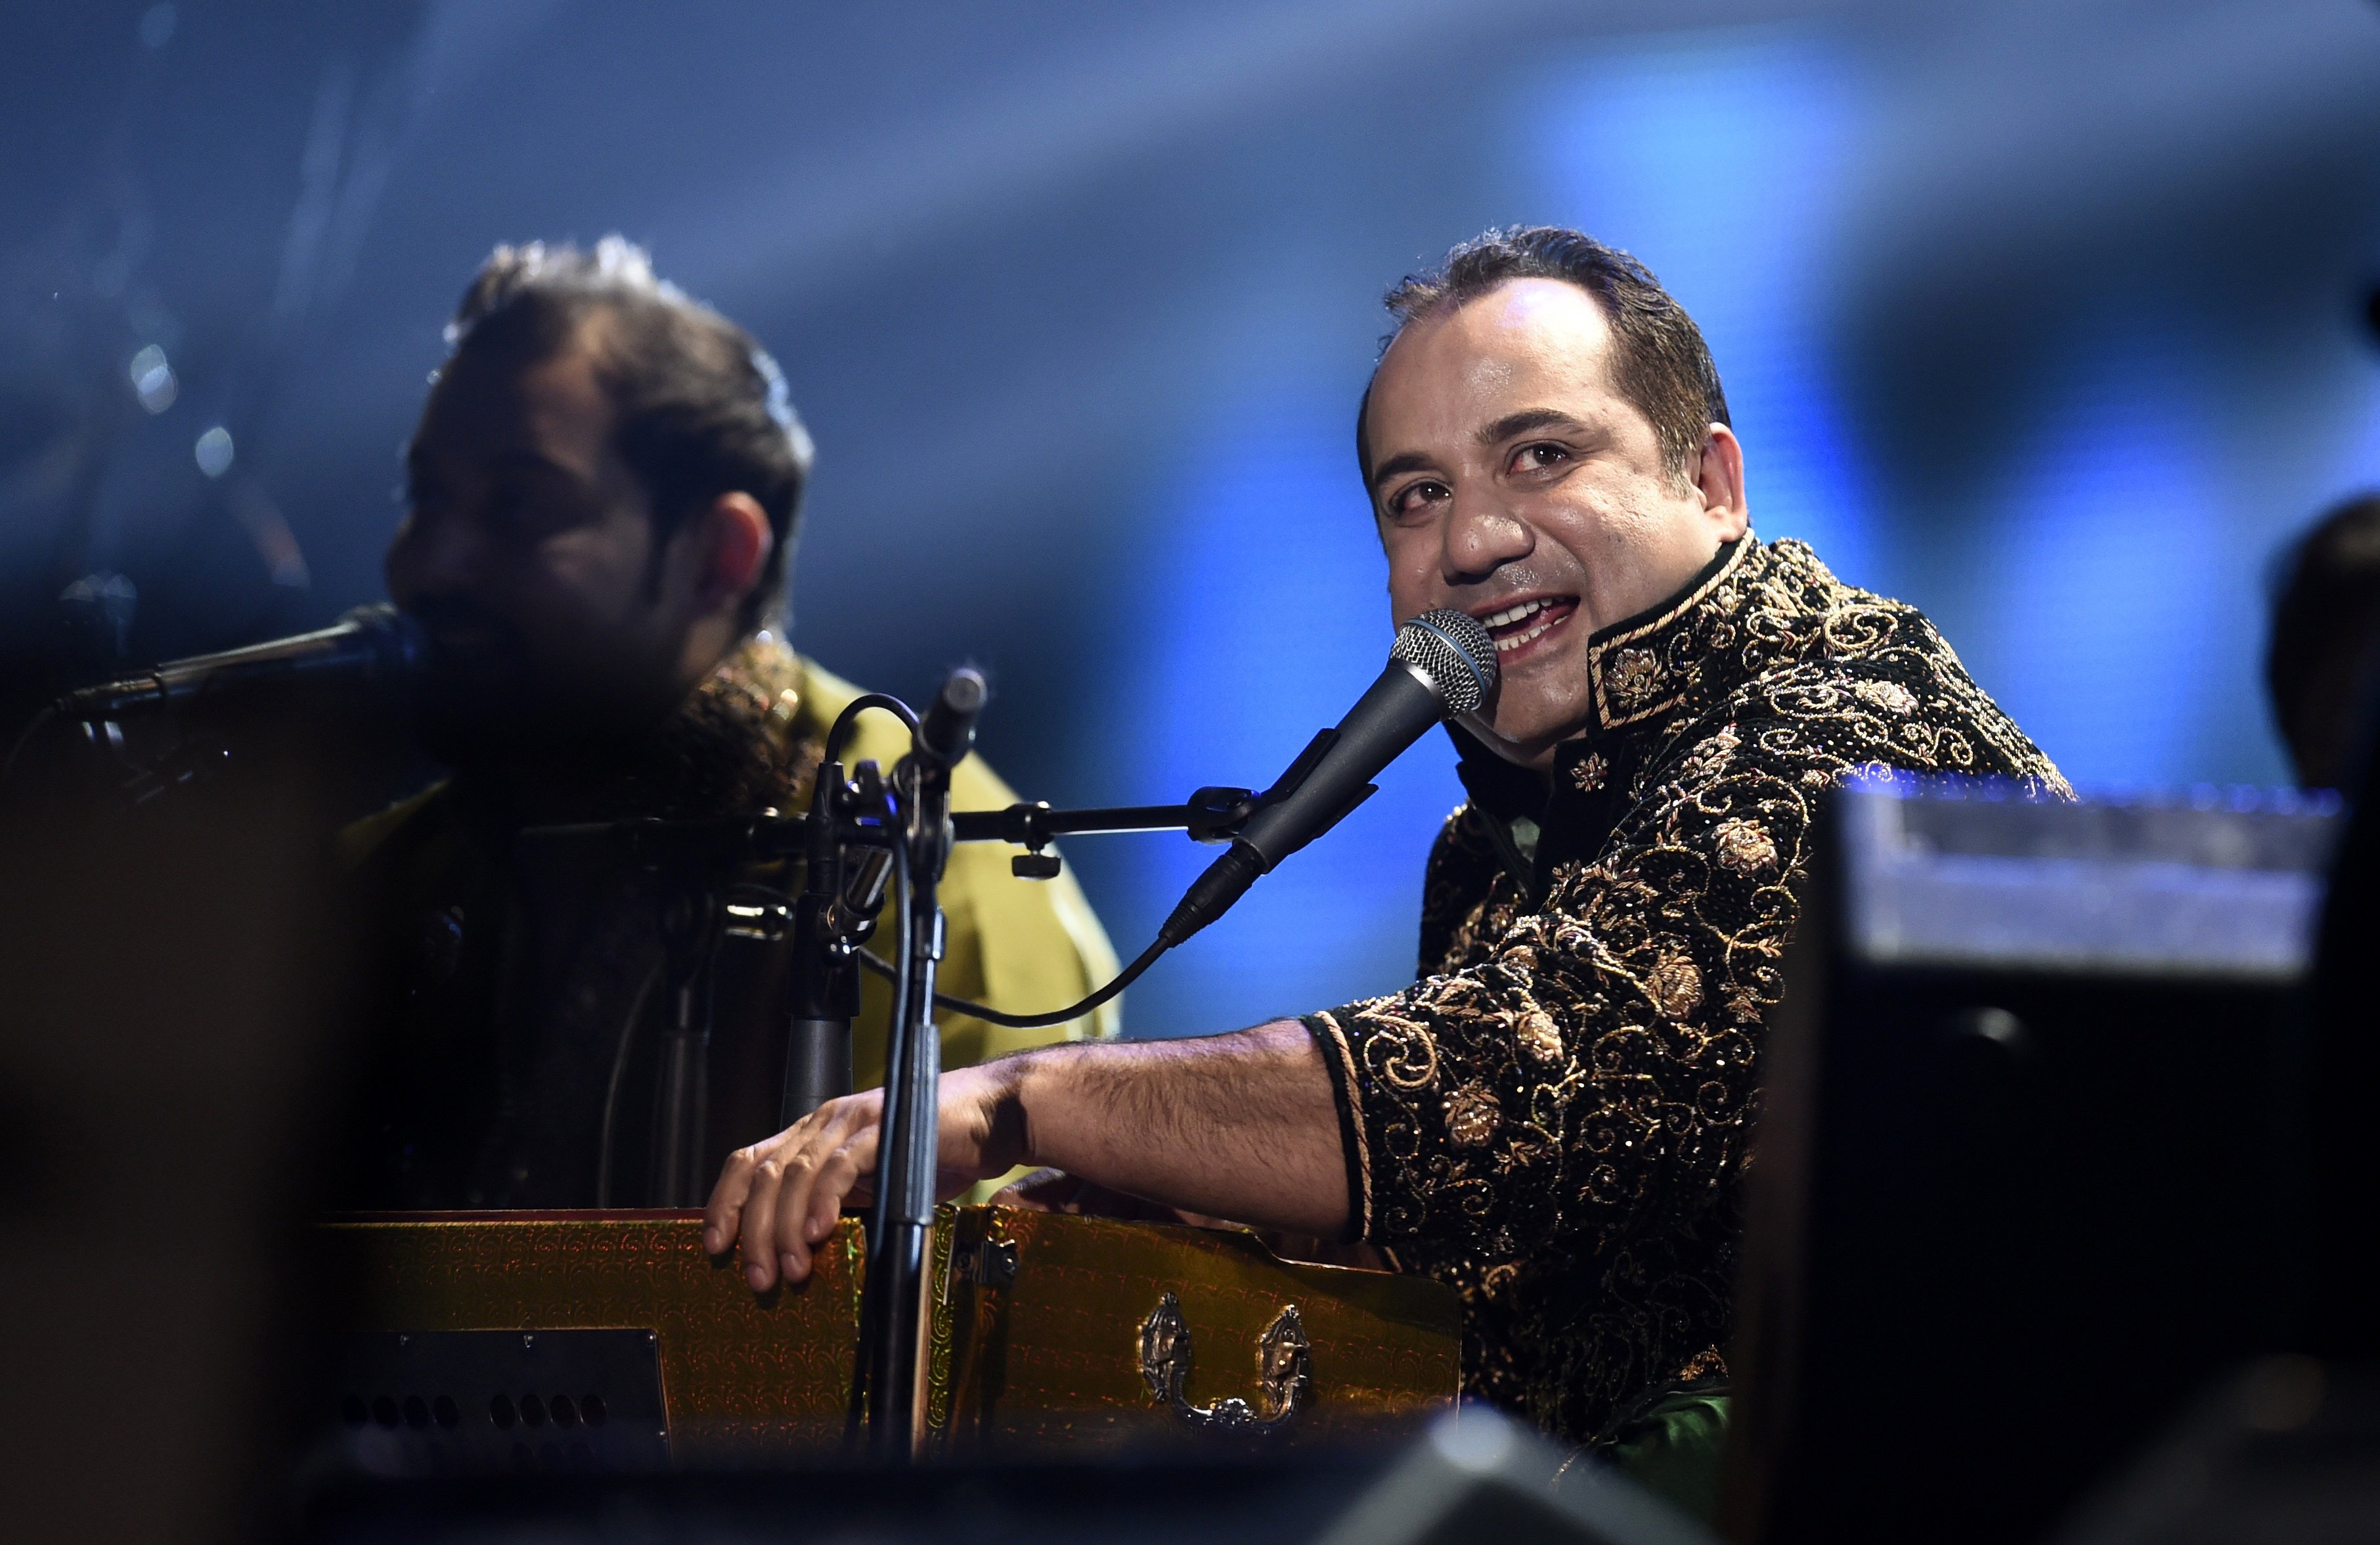 Pakistani singer Ustad Rahat Fateh Ali Khan performs at the Nobel Peace Prize Concert at the Oslo spectrum in 2014. Khan, one of the iconic singers of qawwali, a form of devotional music popular in Pakistan and beyond, was appointed as the trust’s ambassador by King Charles in 2017. Photo: AFP